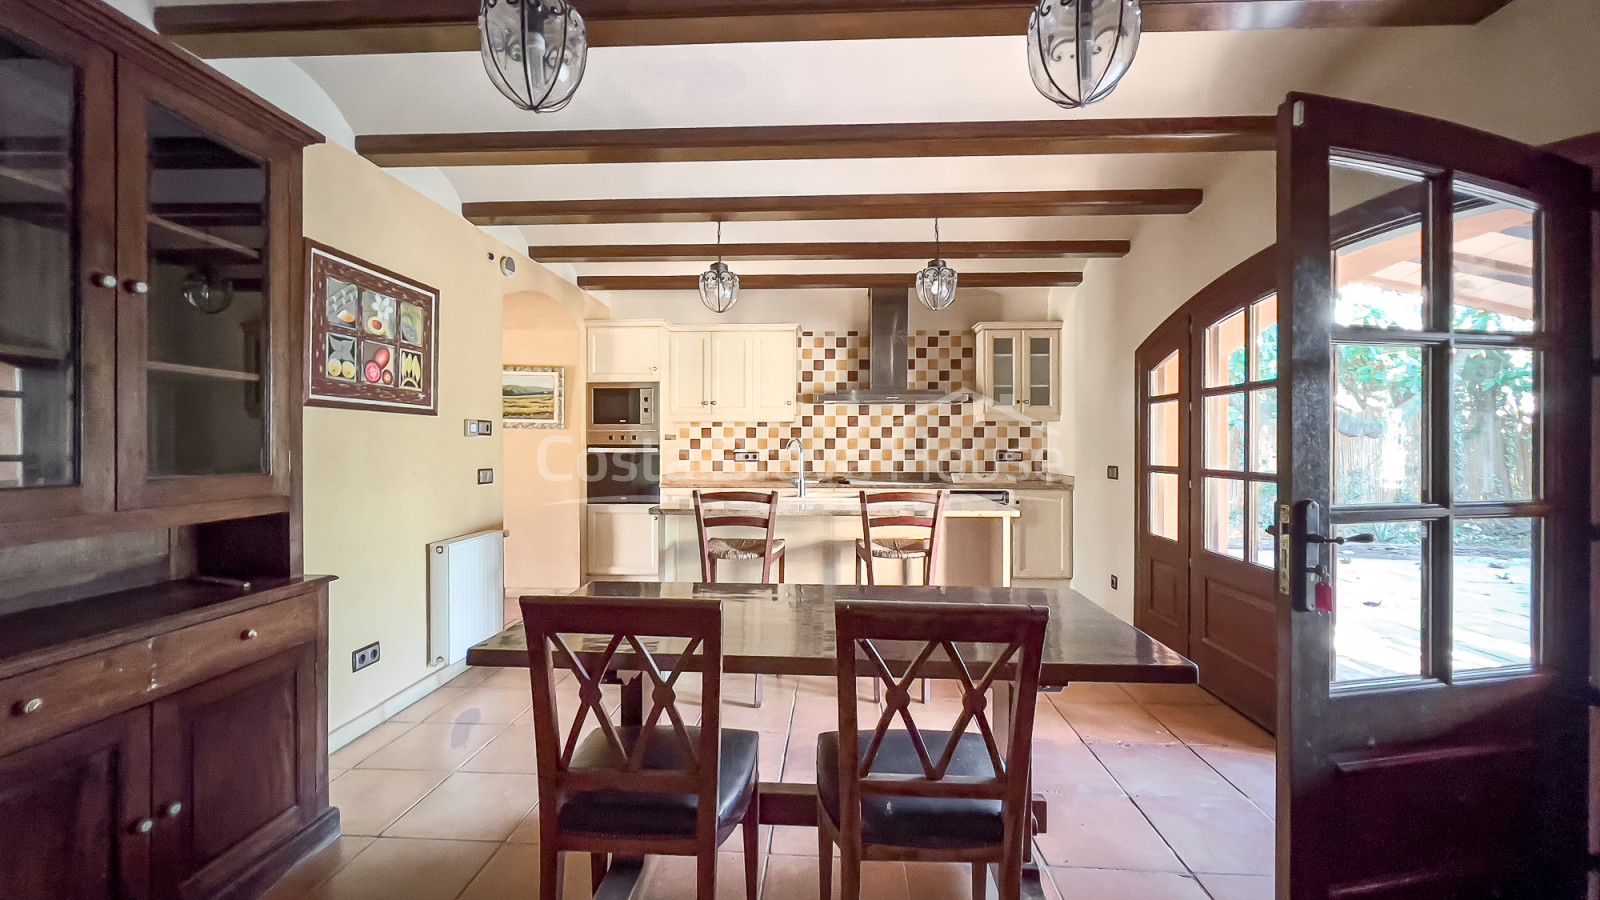 Stately masia in Baix Empordà 5 ha of land and stables